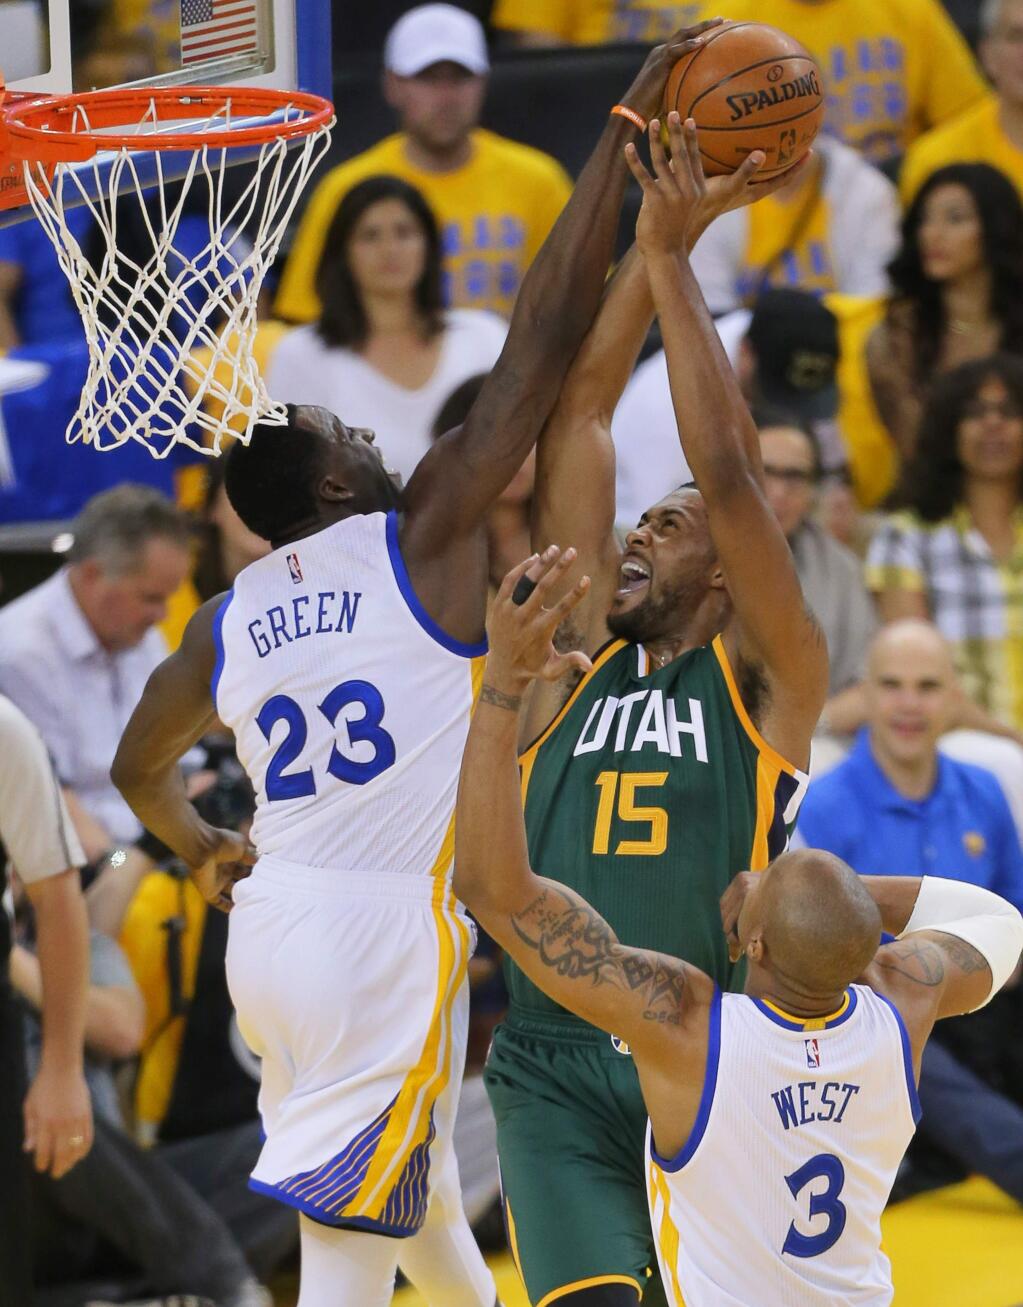 Golden State Warriors forward Draymond Green blocks a shot attempt by Utah Jazz center Derrick Favors, during Game 1 of the of NBA Western Conference Semifinals in Oakland on Tuesday, May 2, 2017. (Christopher Chung/ The Press Democrat)